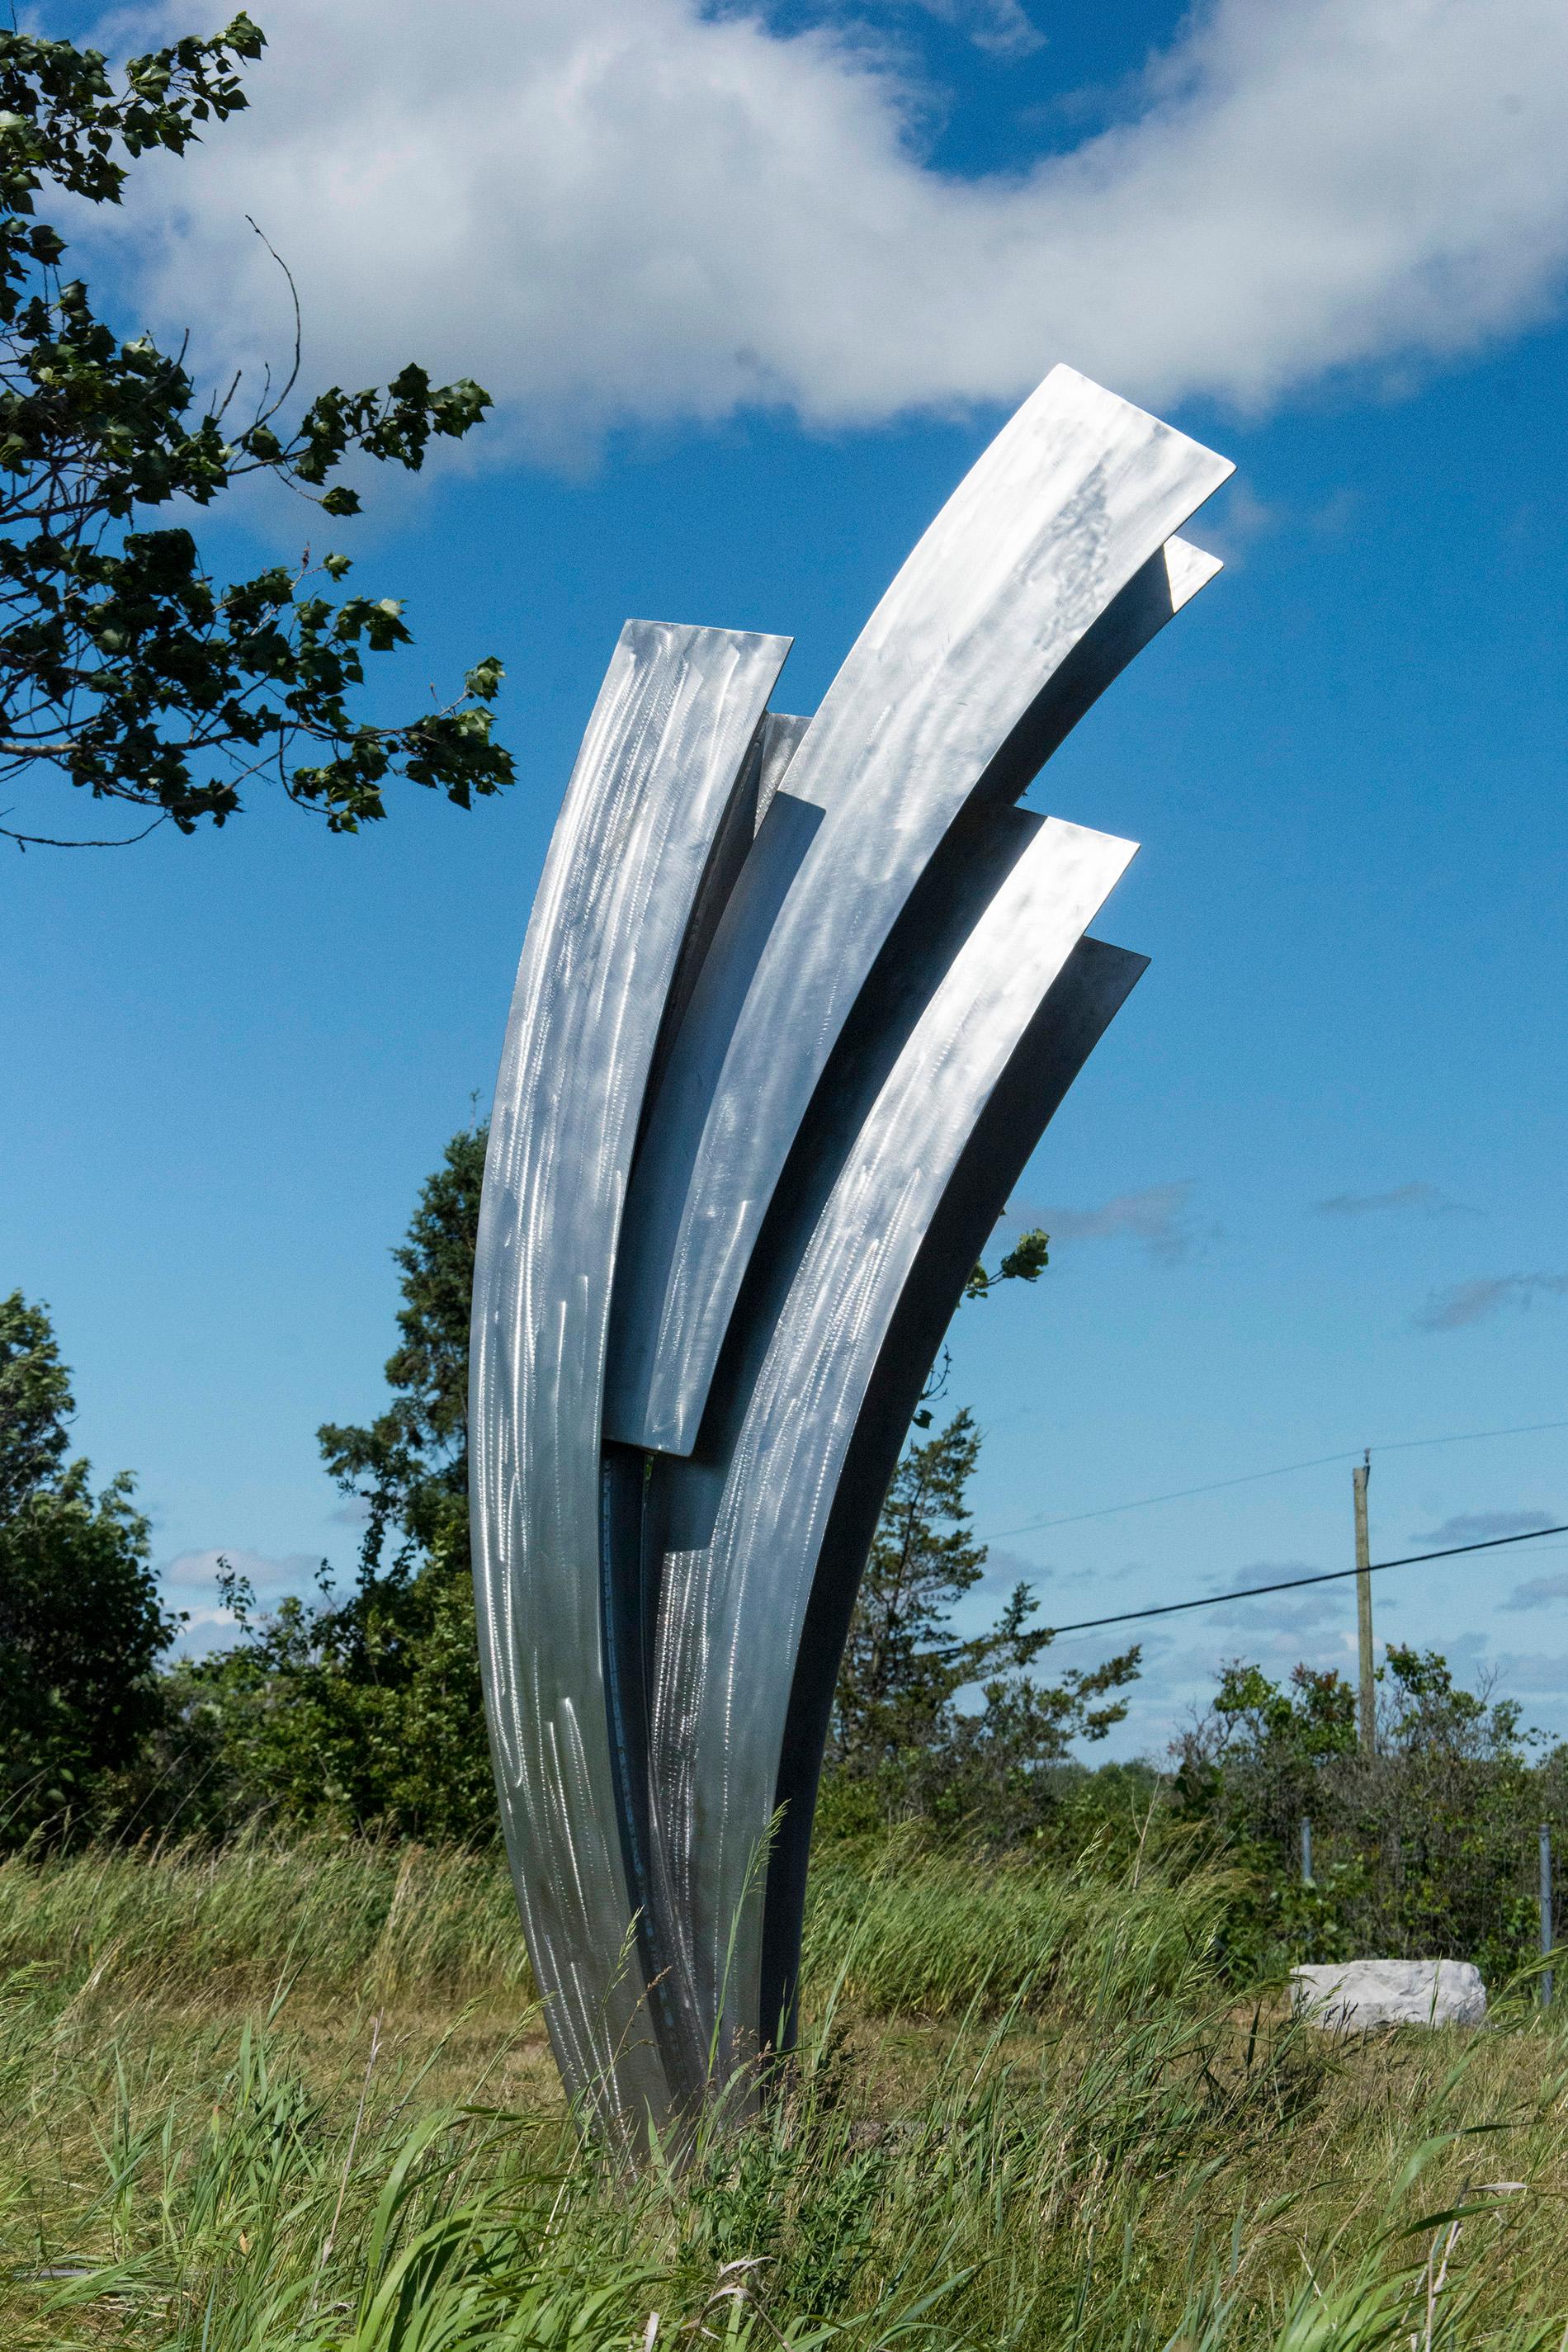 Claude Millette Abstract Sculpture - Projection - large, dynamic, minimalist, stainless steel outdoor sculpture